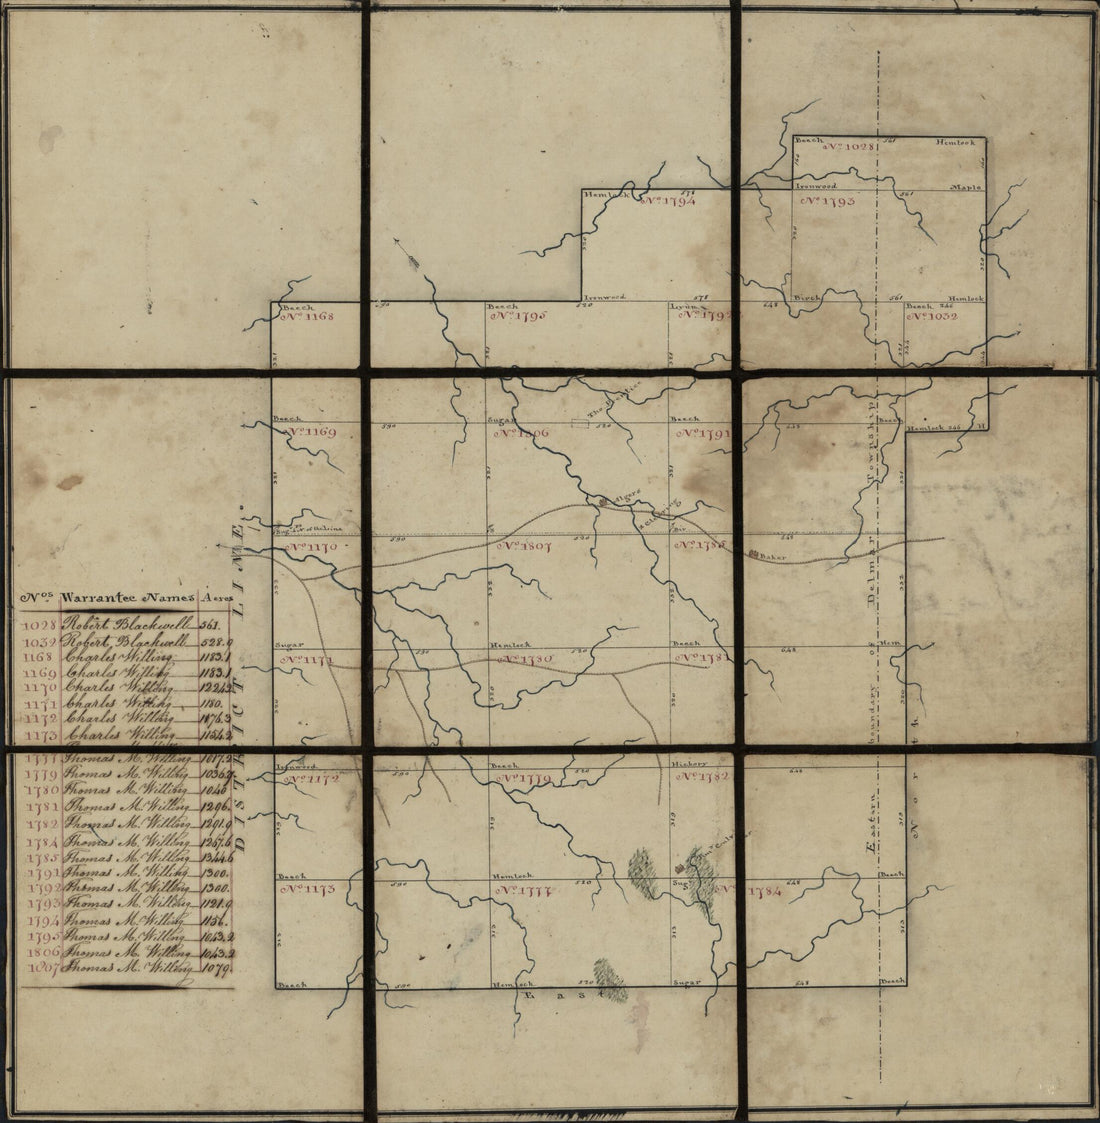 This old map of 20 Tracts, Tioga County from 1800 was created by William Bingham in 1800